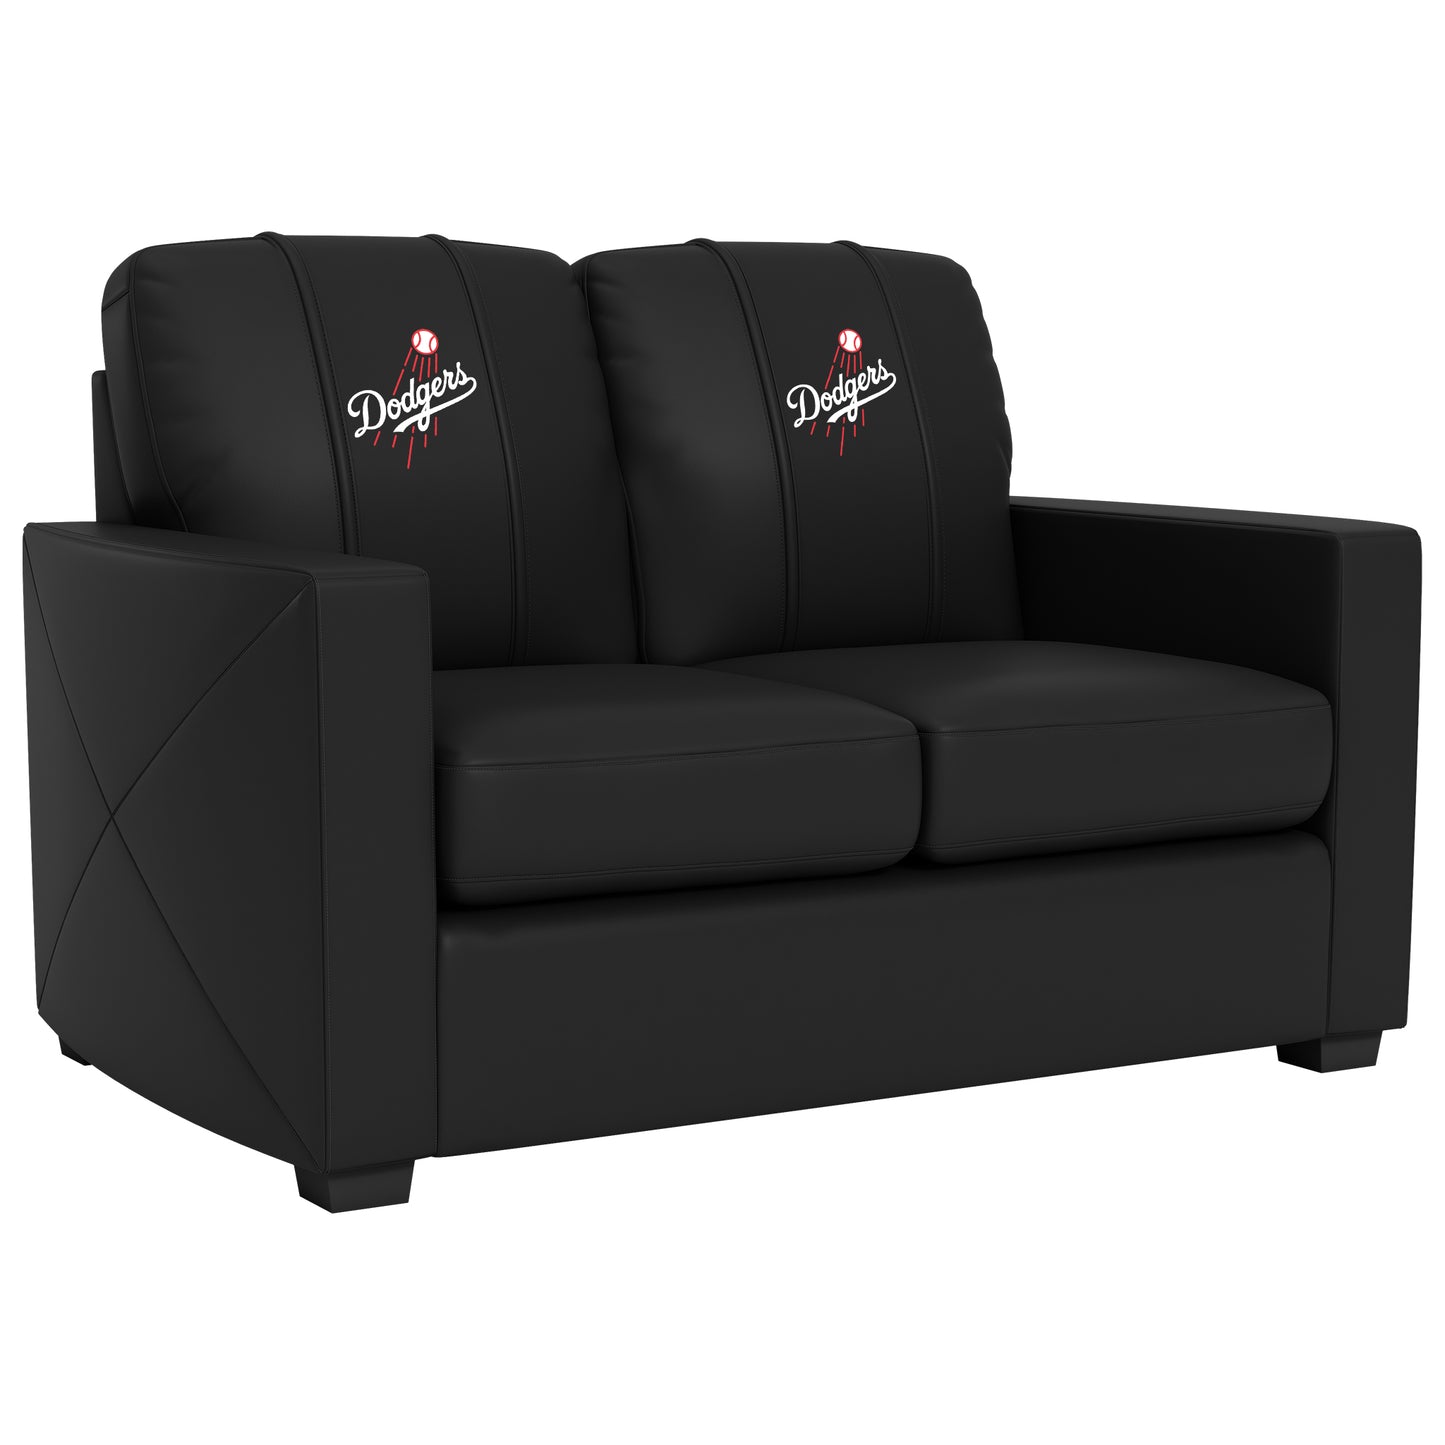 Silver Loveseat with Los Angeles Dodgers Logo